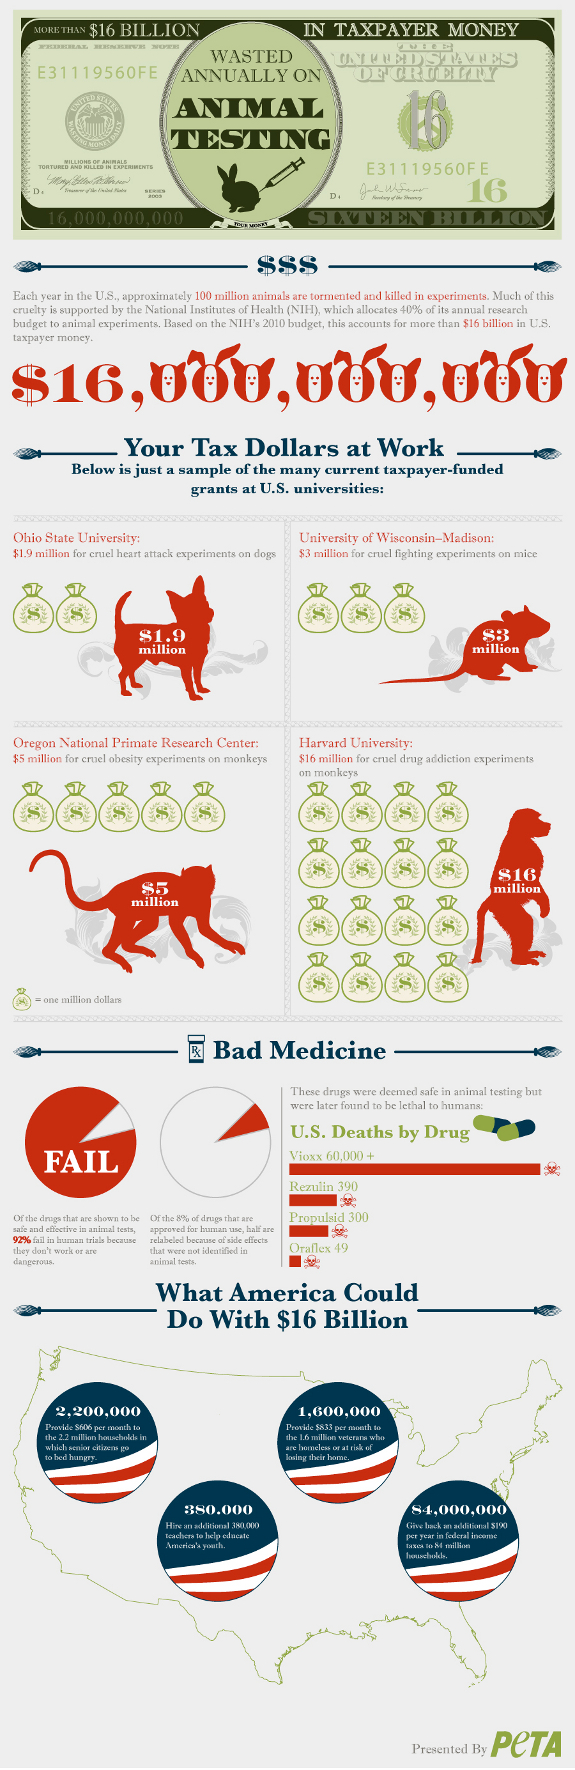 27 Animal Experimentation Statistics and Facts 